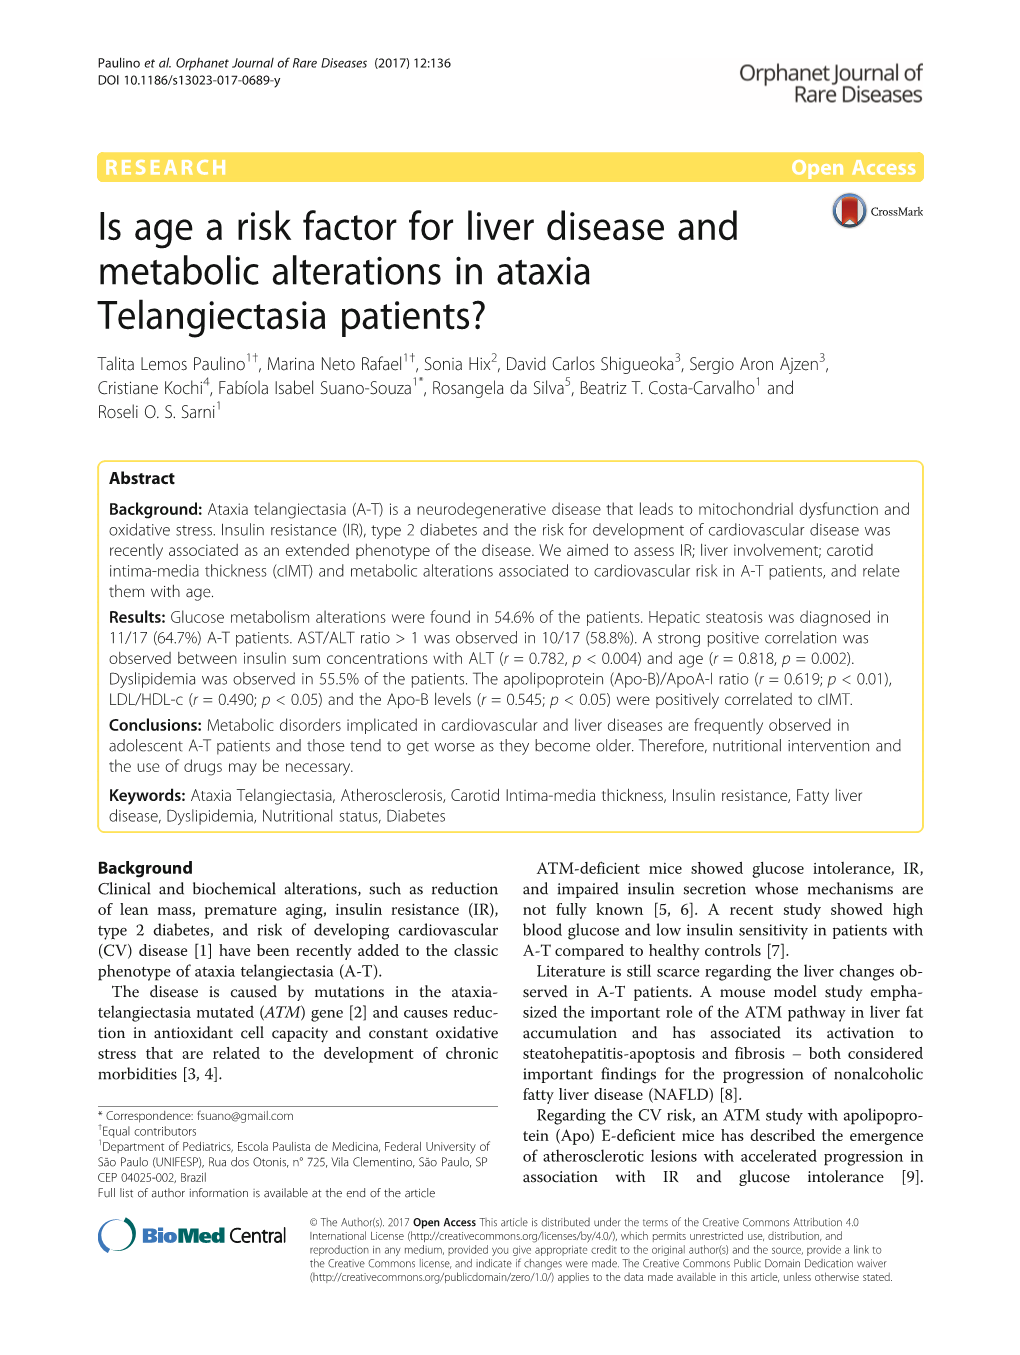 Is Age a Risk Factor for Liver Disease and Metabolic Alterations in Ataxia